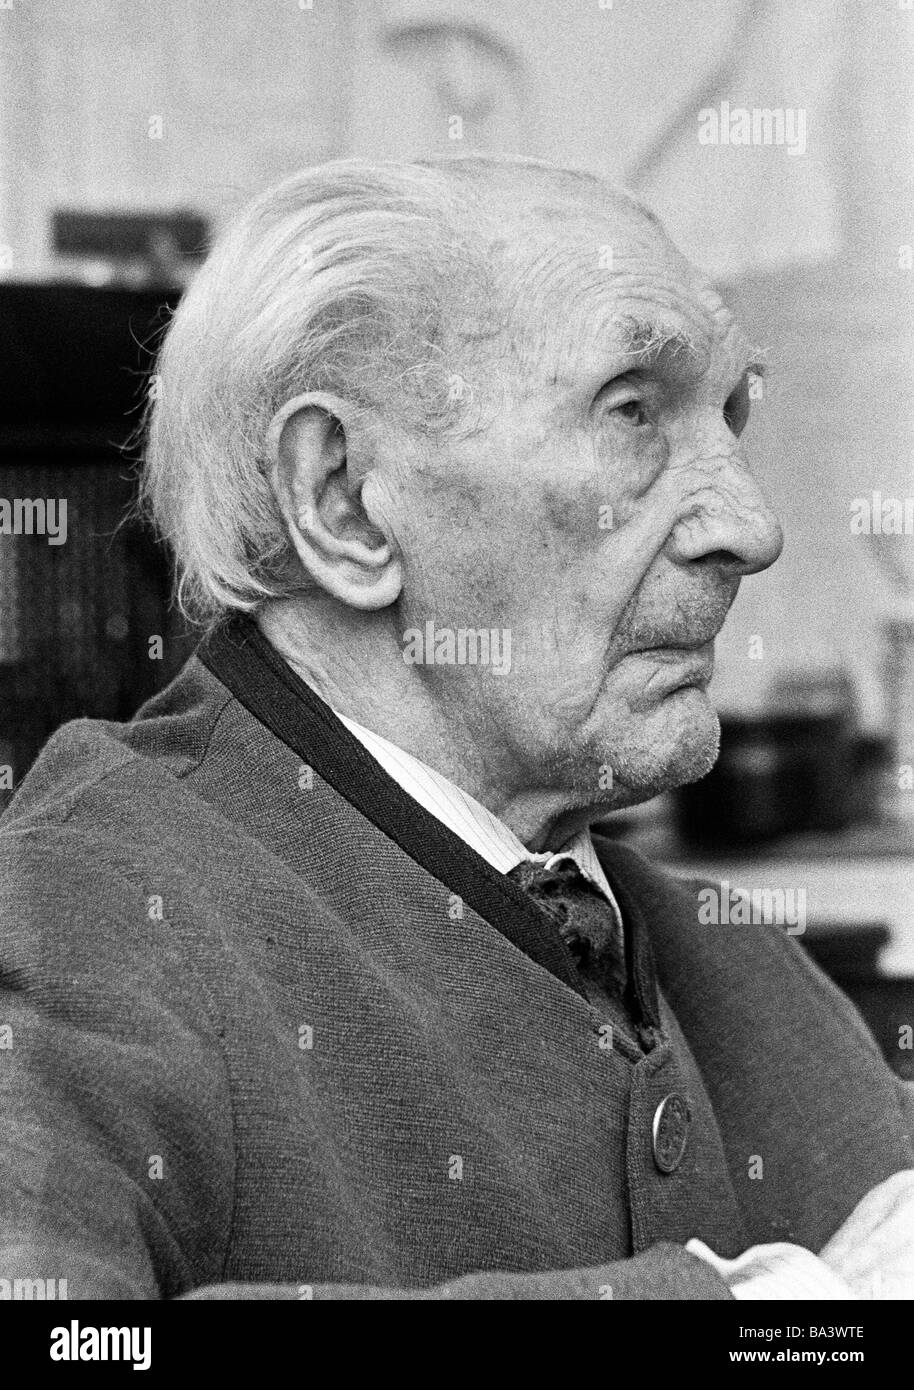 Seventies, black and white photo, people, older man, portrait, waistcoat, aged 90 to 100 years Stock Photo